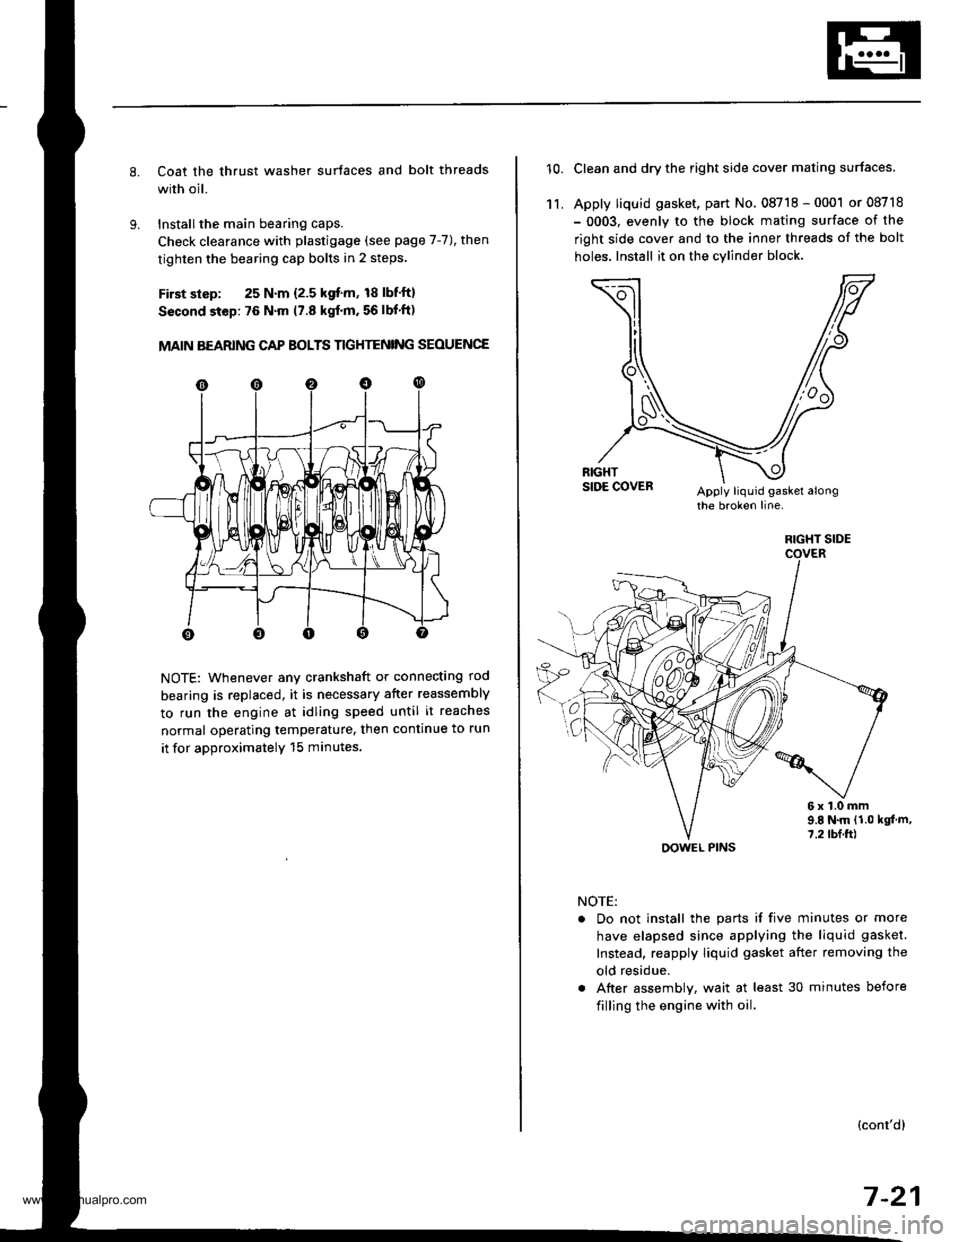 HONDA CR-V 2000 RD1-RD3 / 1.G Owners Manual 
Coat the thrust washer surtaces and bolt threads
with oil.
Installthe main bearing caps.
Check clearance with plastigage (see page 7-7), then
tighten the bearing cap bolts in 2 steps.
First slsp: 25 